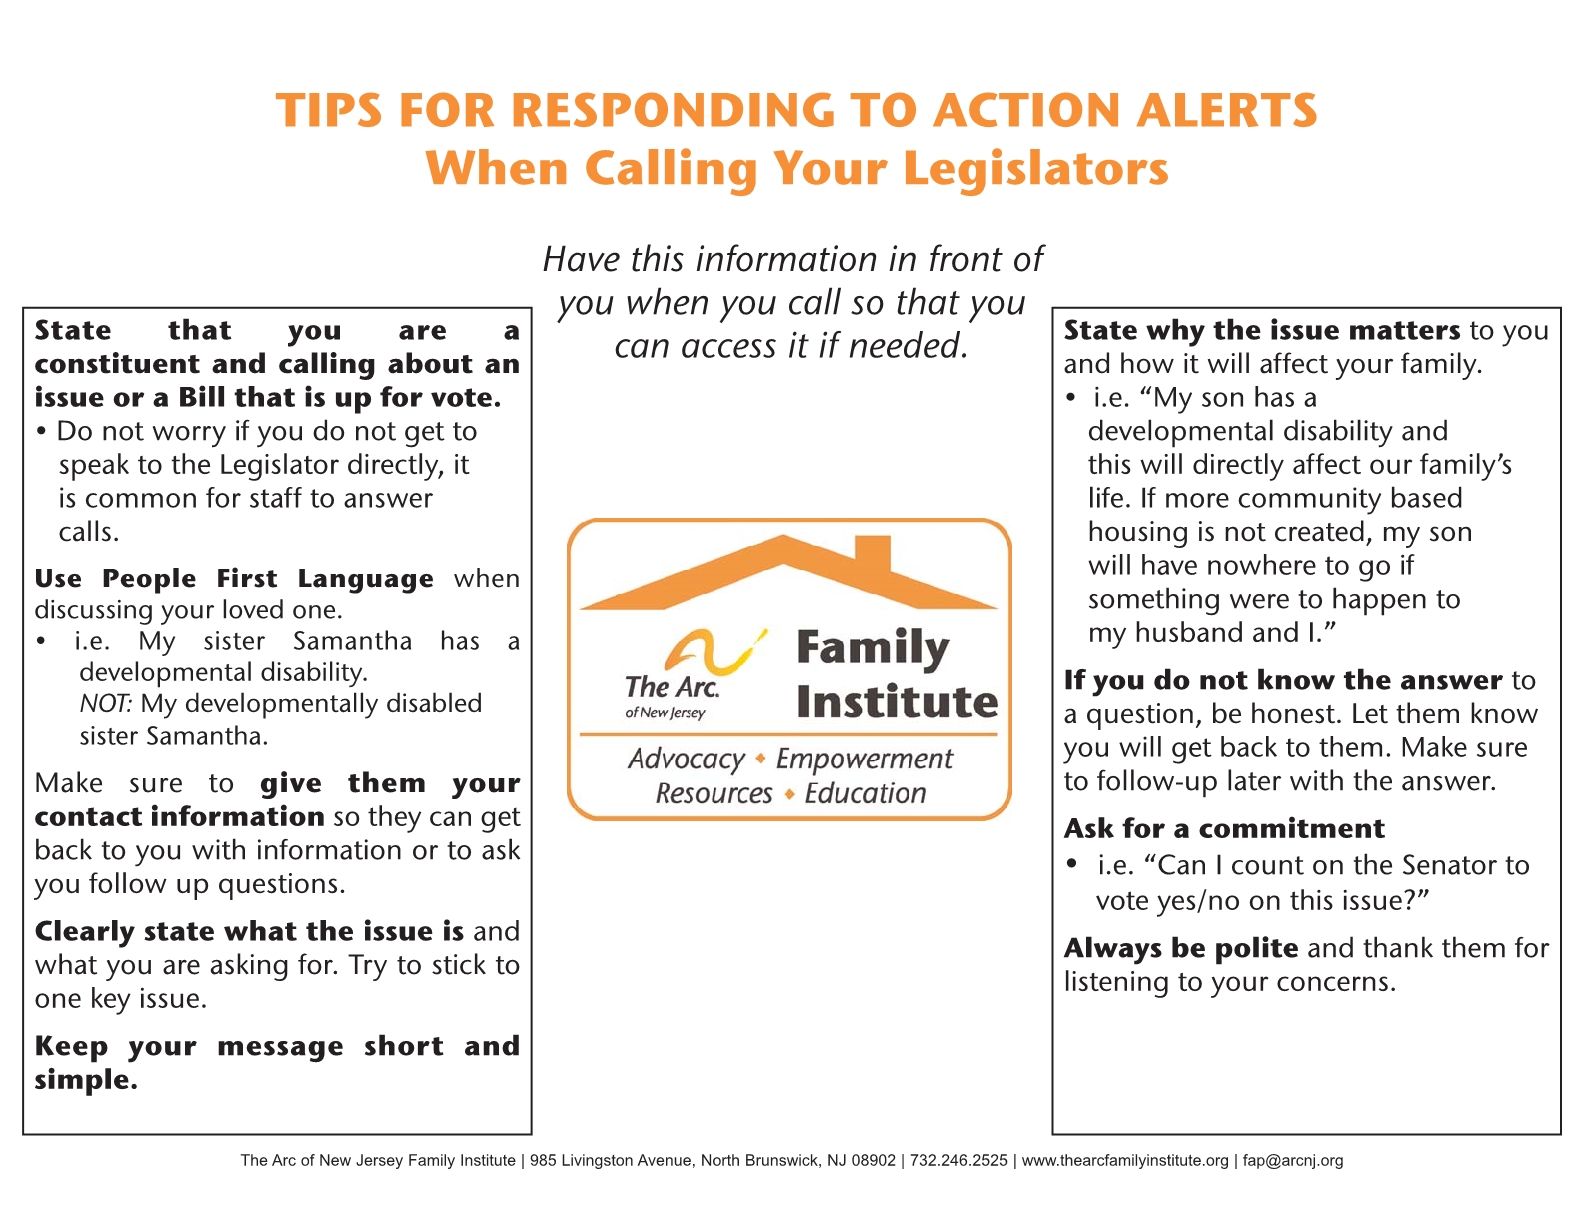 Tips for responding to action alerts when calling